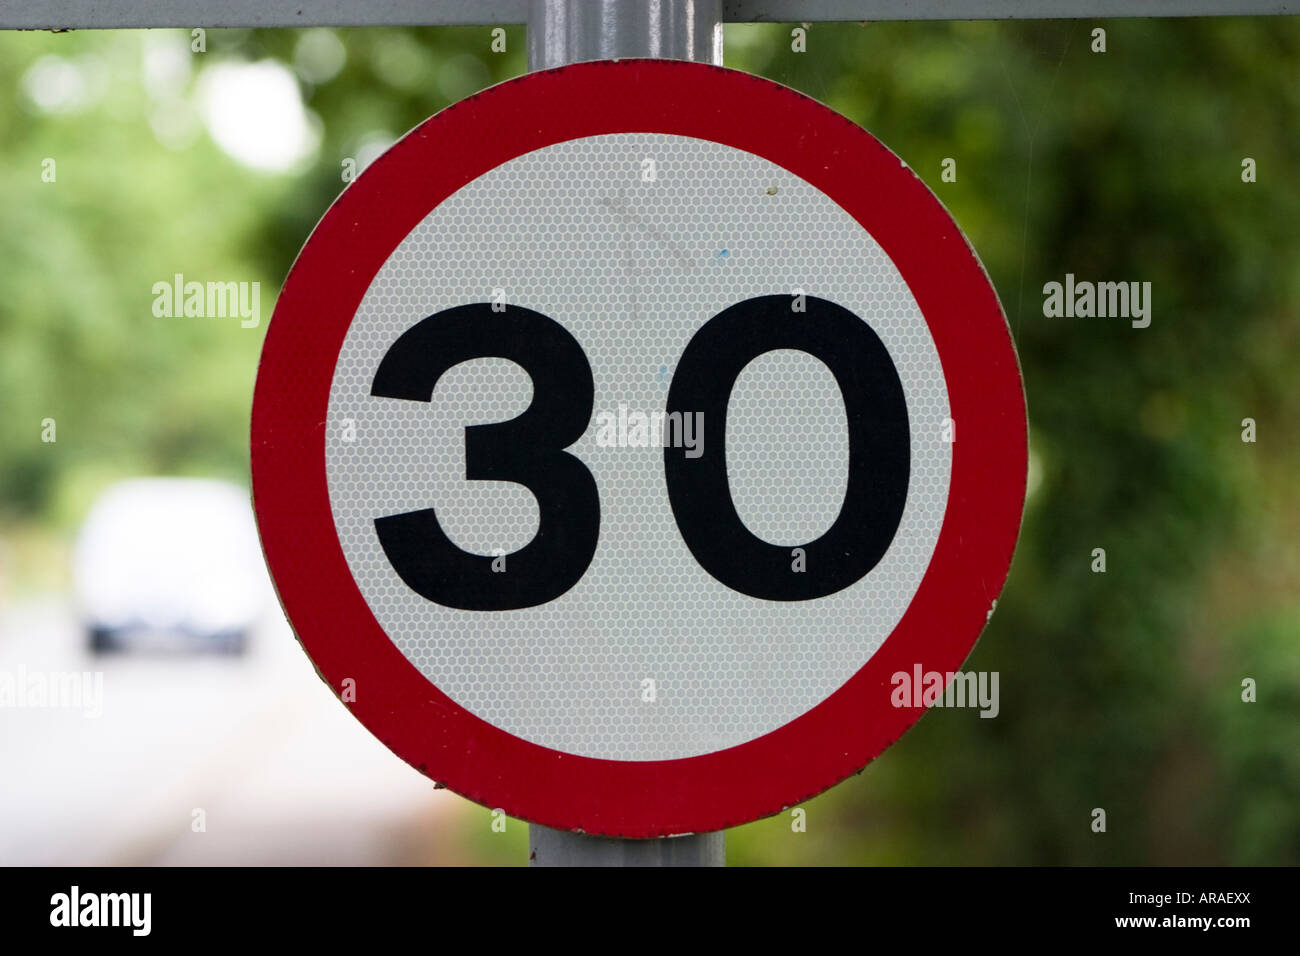 30mph speed limit road sign Stock Photo